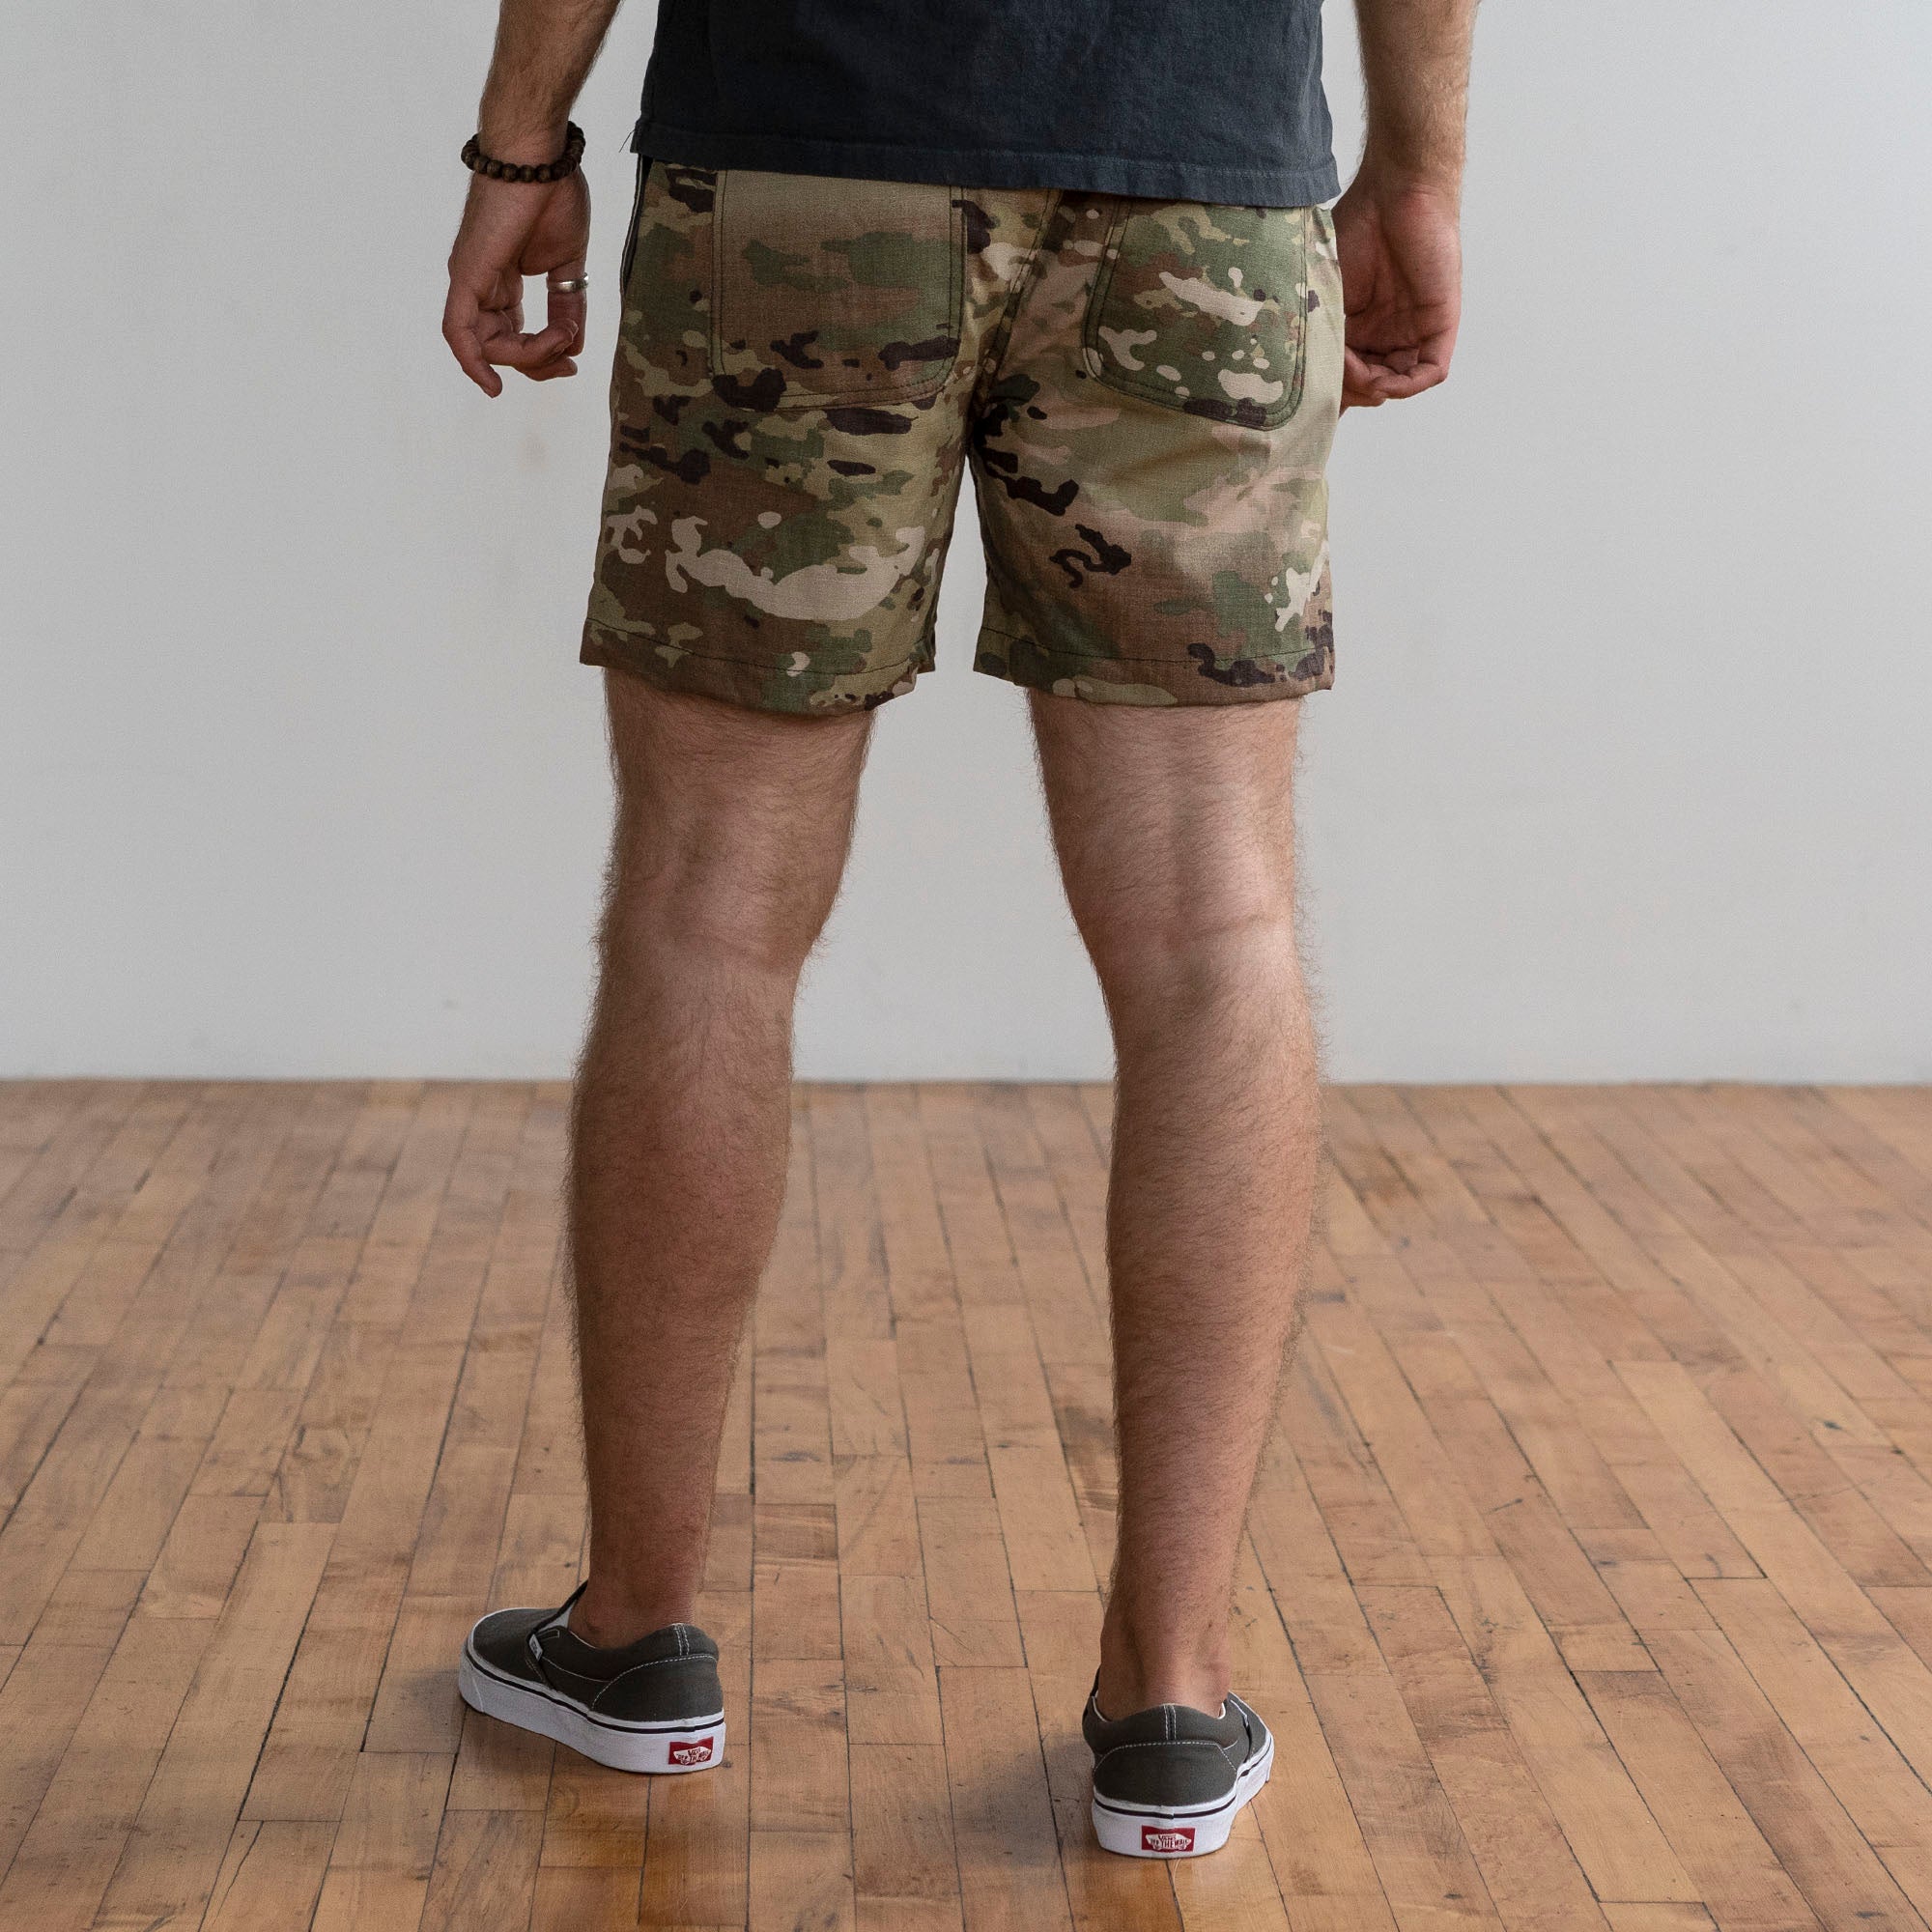 Laidback Short in MultiCam Cotton Ripstop Sz Small